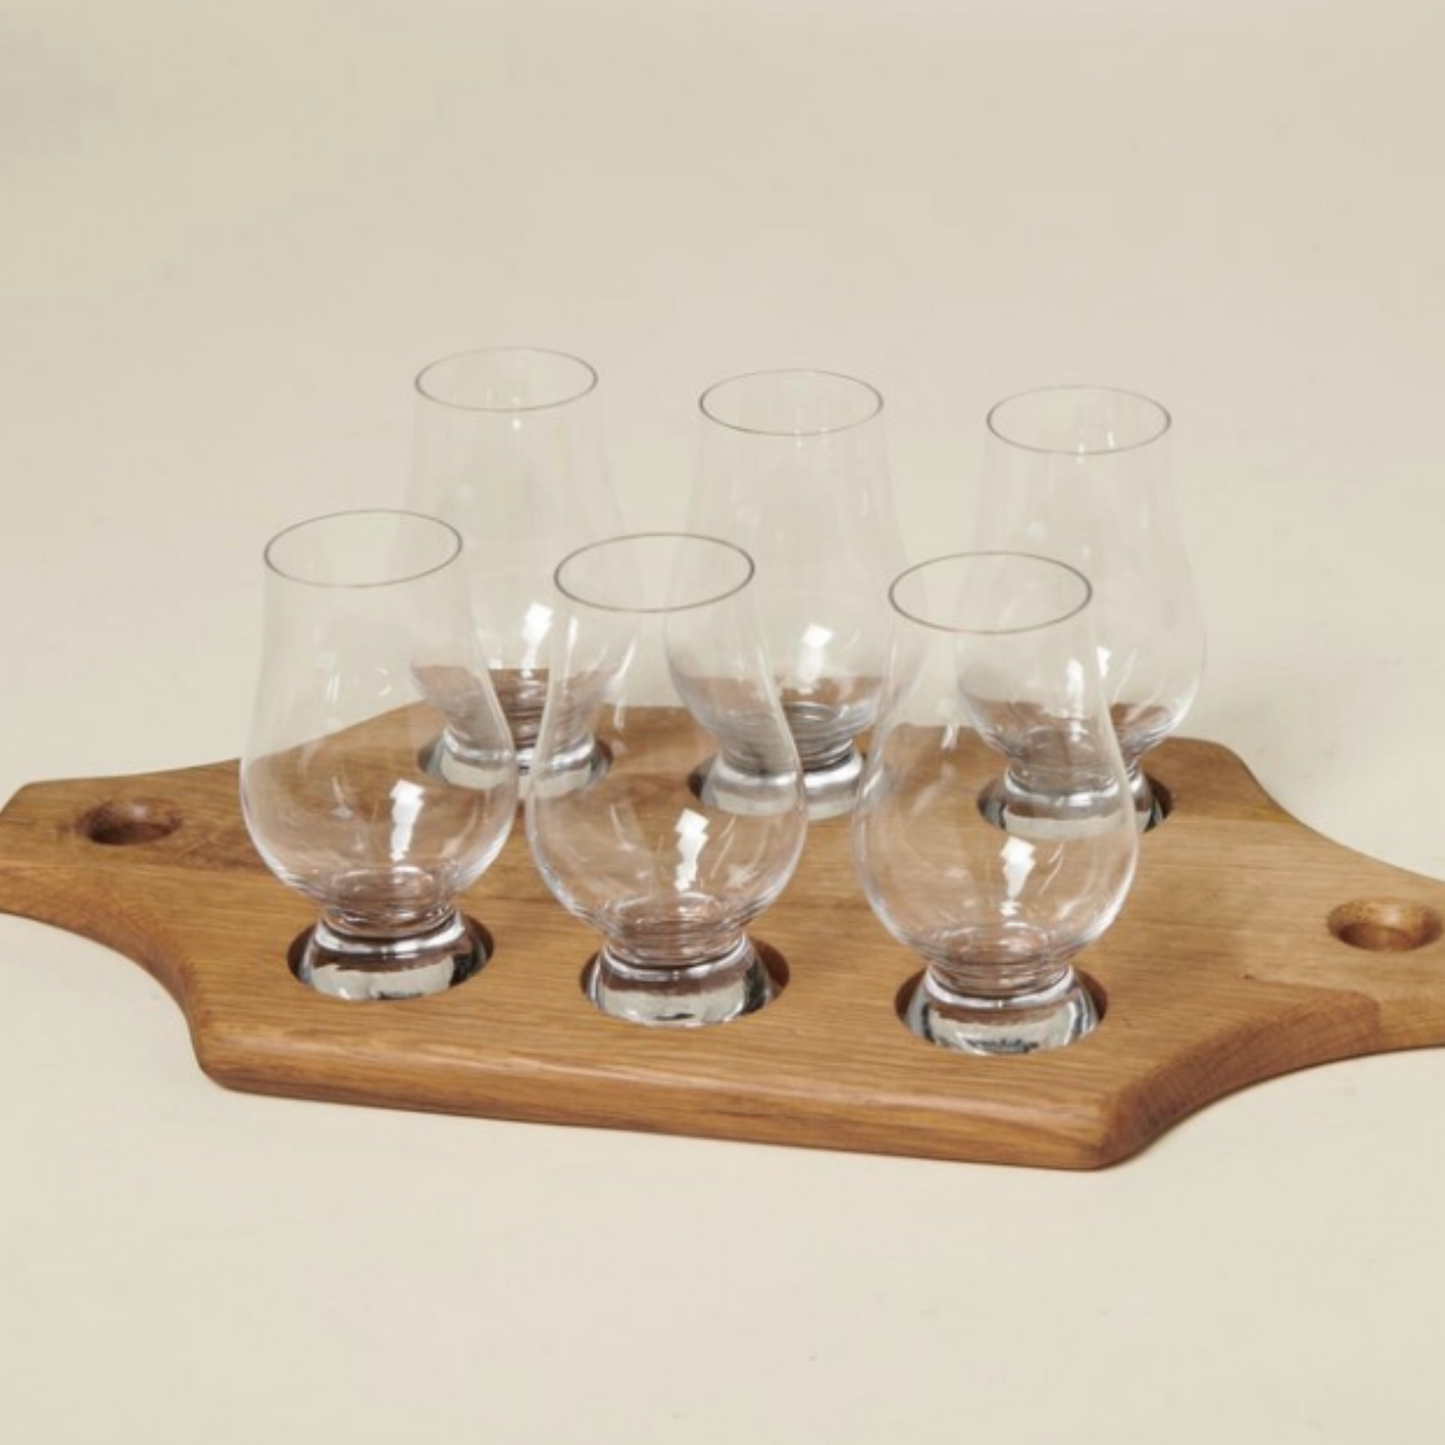 Two Handle Whisky Glass Flight Tray